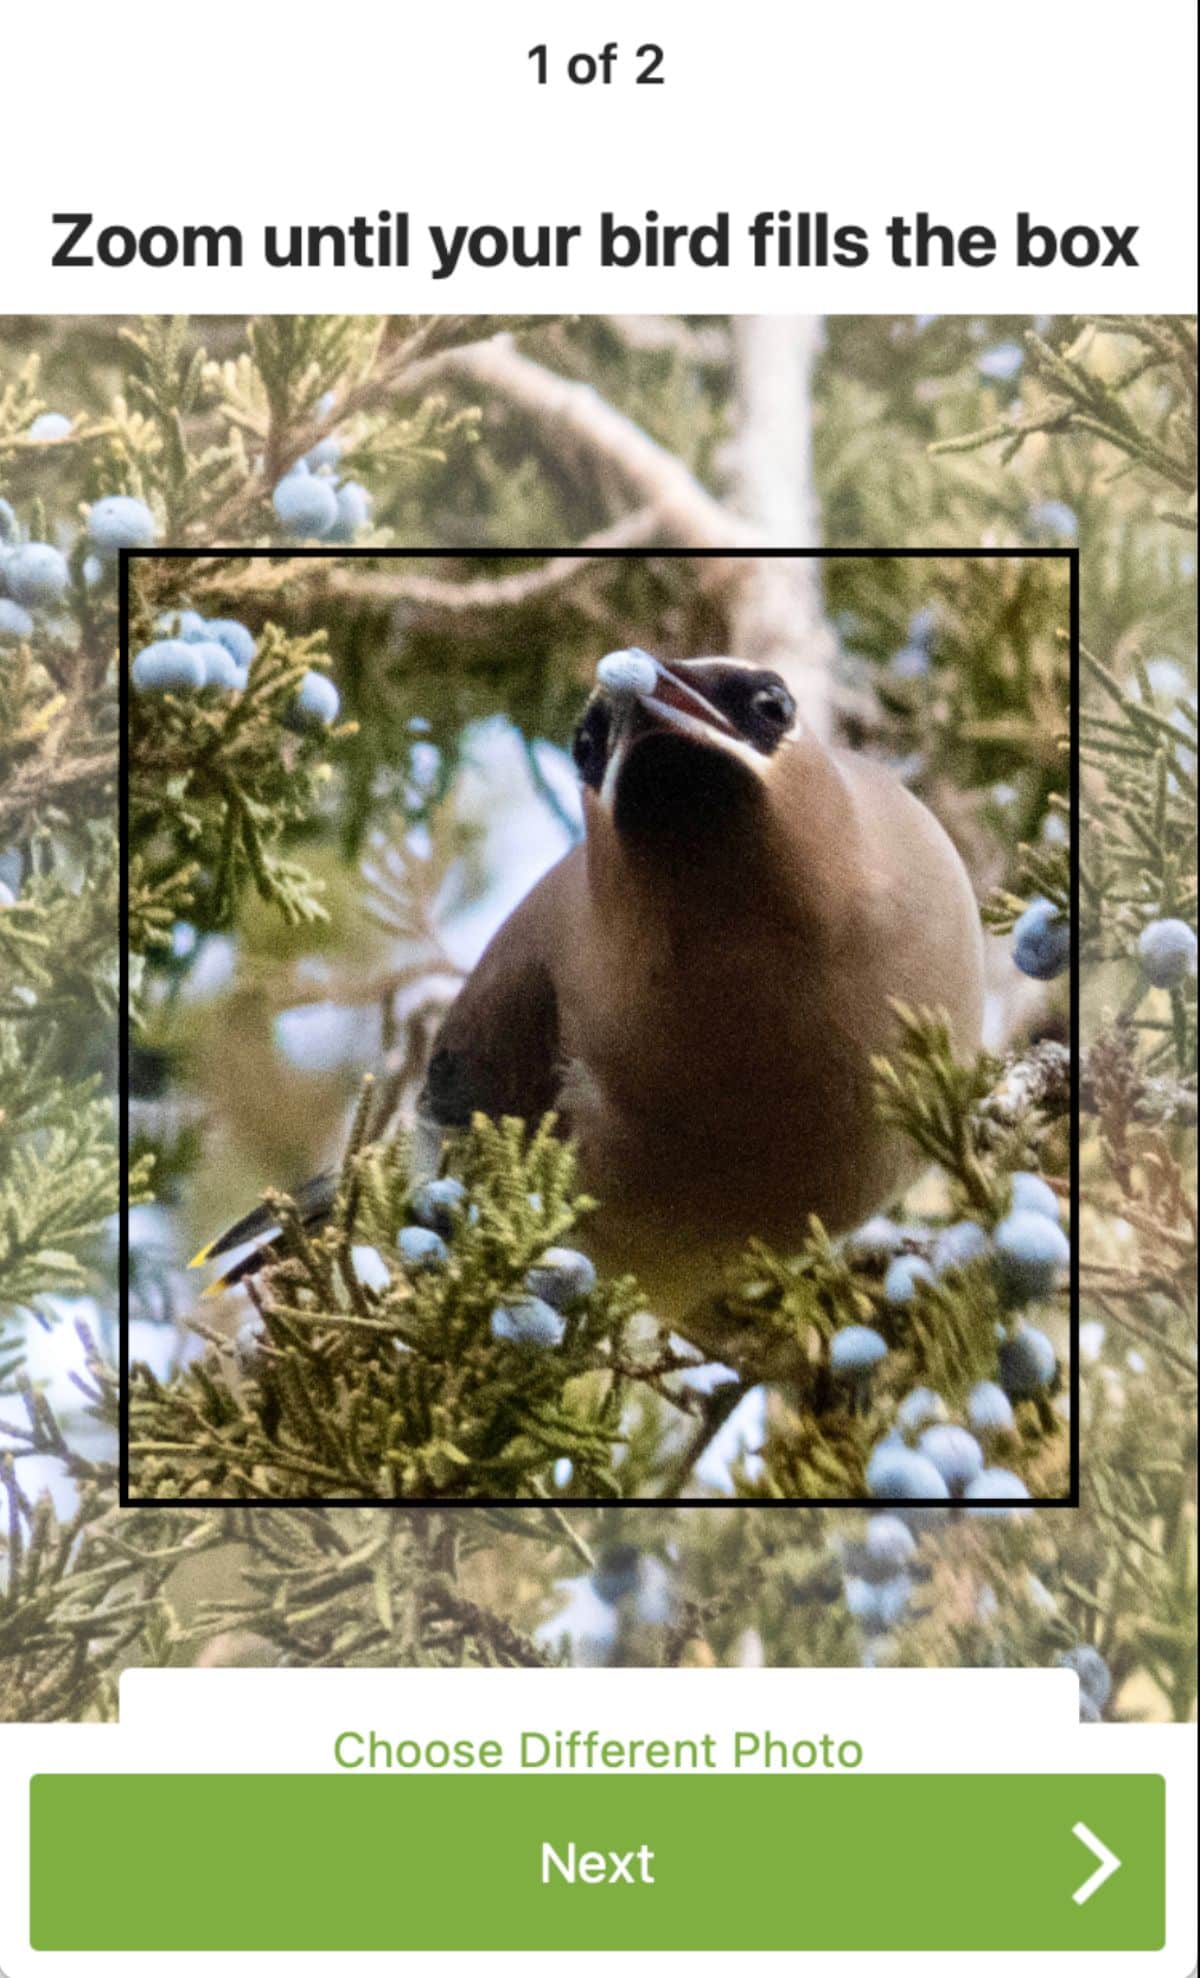 Using zoom to focus on the bird in the picture